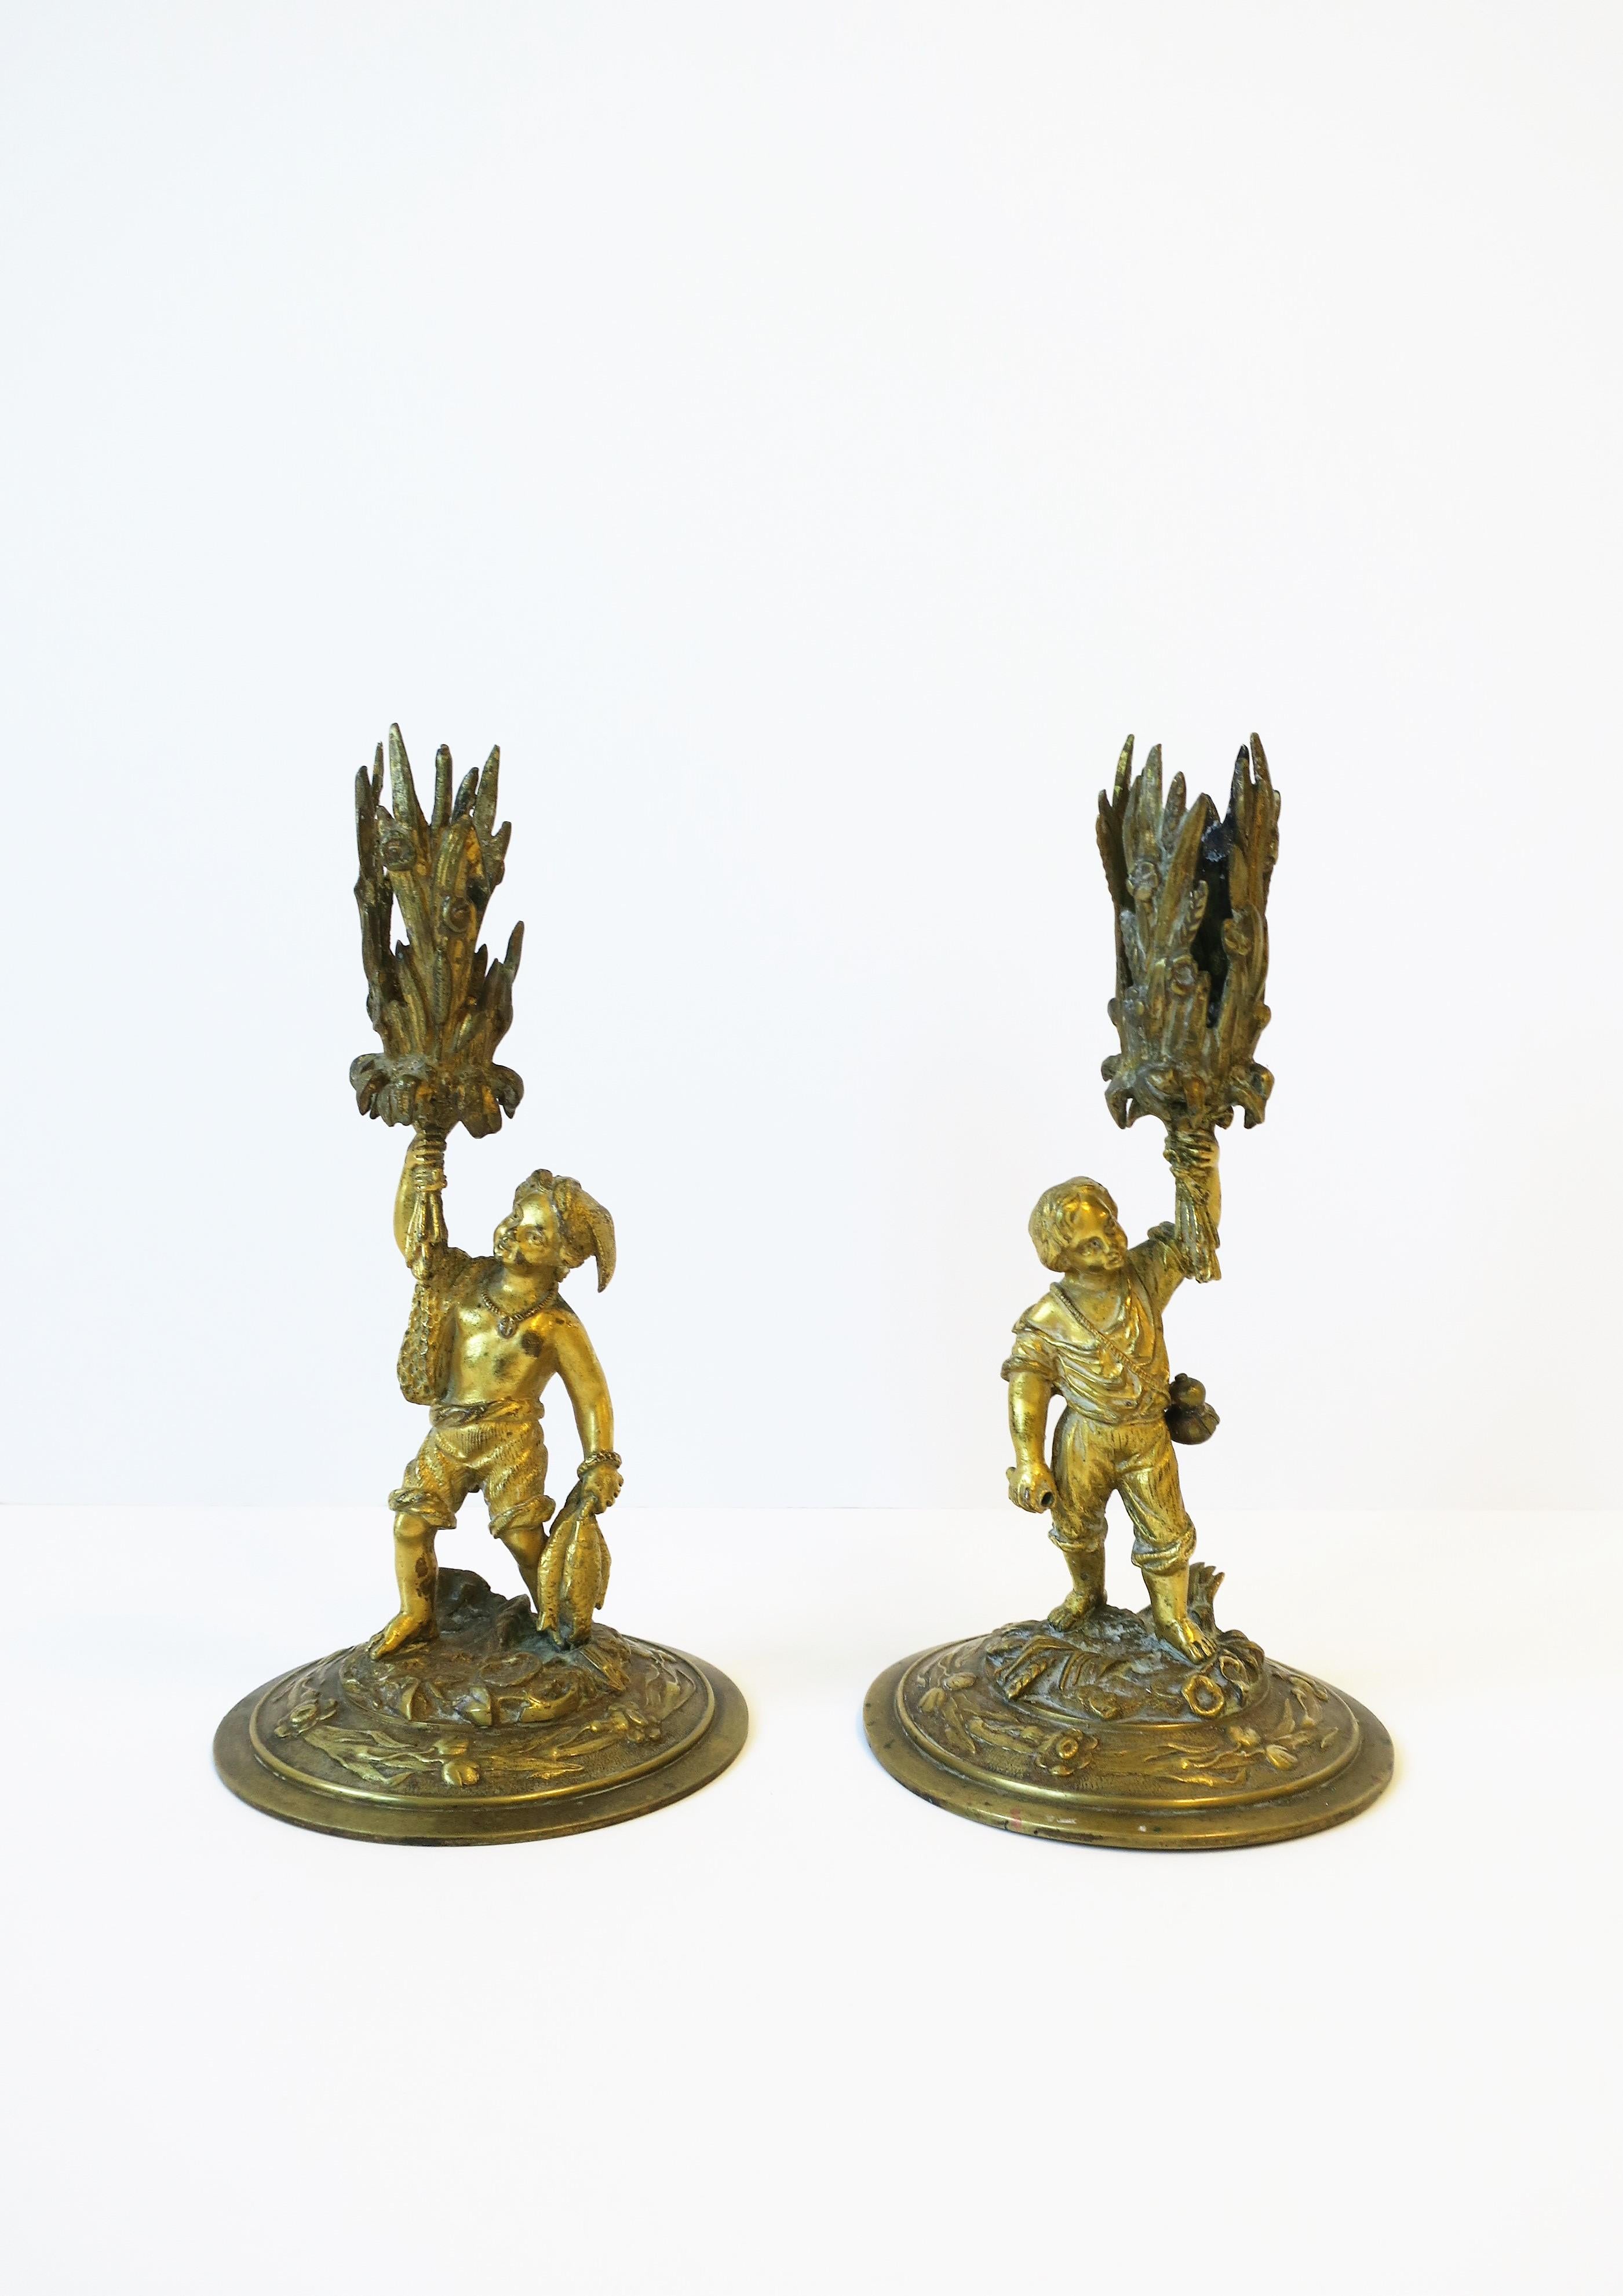 A pair of gilt bronze young male figurative sculptures candlestick holders, circa 19th Century, Europe. A beautiful pair with many details including each holding a bunch of sheaf-of-wheat. And it appears the pair had gone fishing; fishing net over